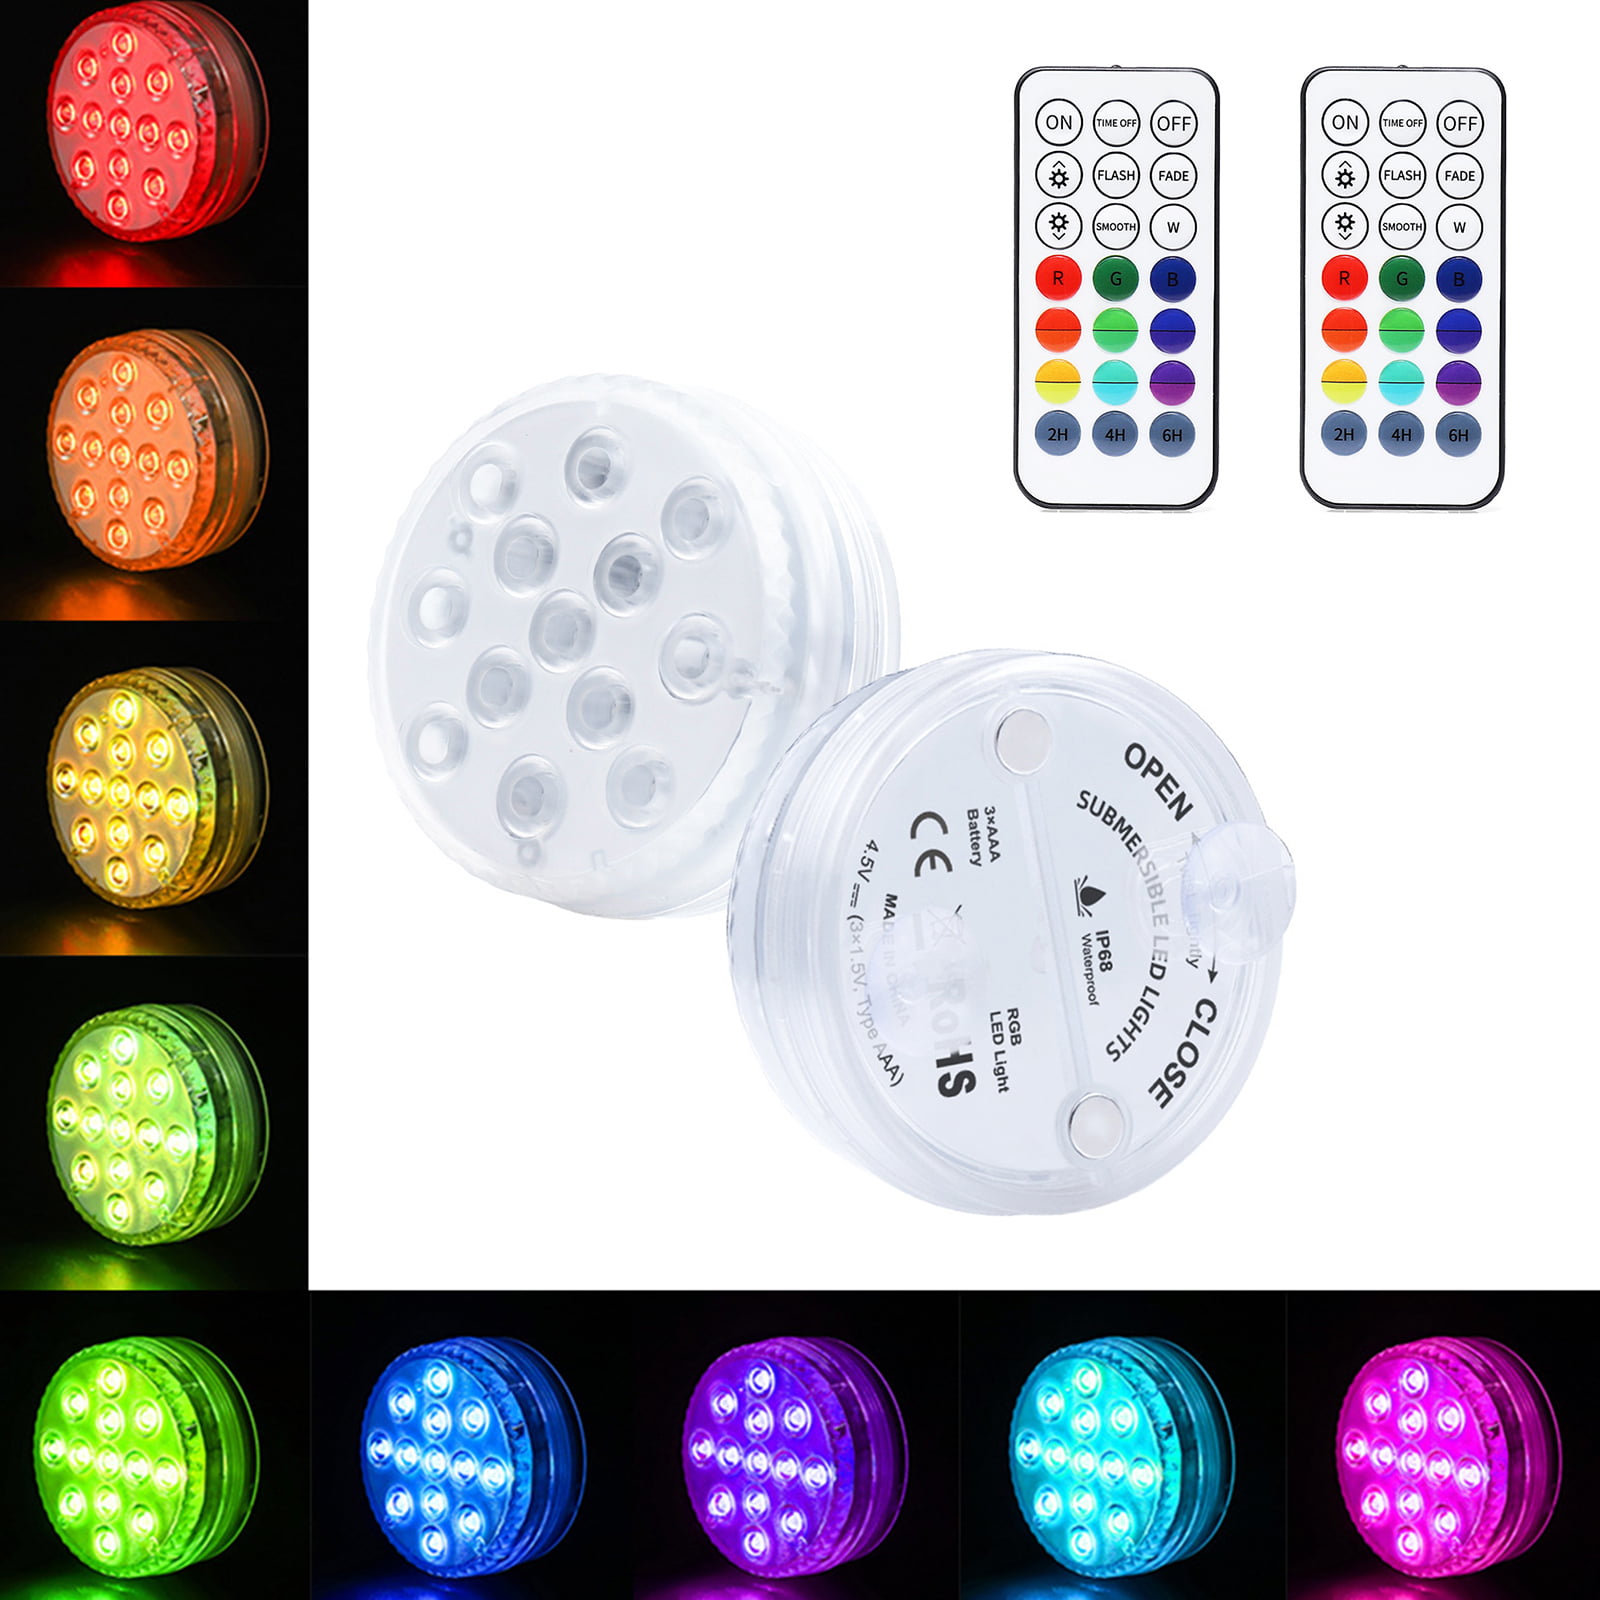 Magicfun Submersible 13 LED Pool Lights with RF Remote Control Magnets 16 Colors Waterproof Underwater Lights Suction Cups Battery Operated Decoration Summer Light for Pond Party Garden -1Pack 